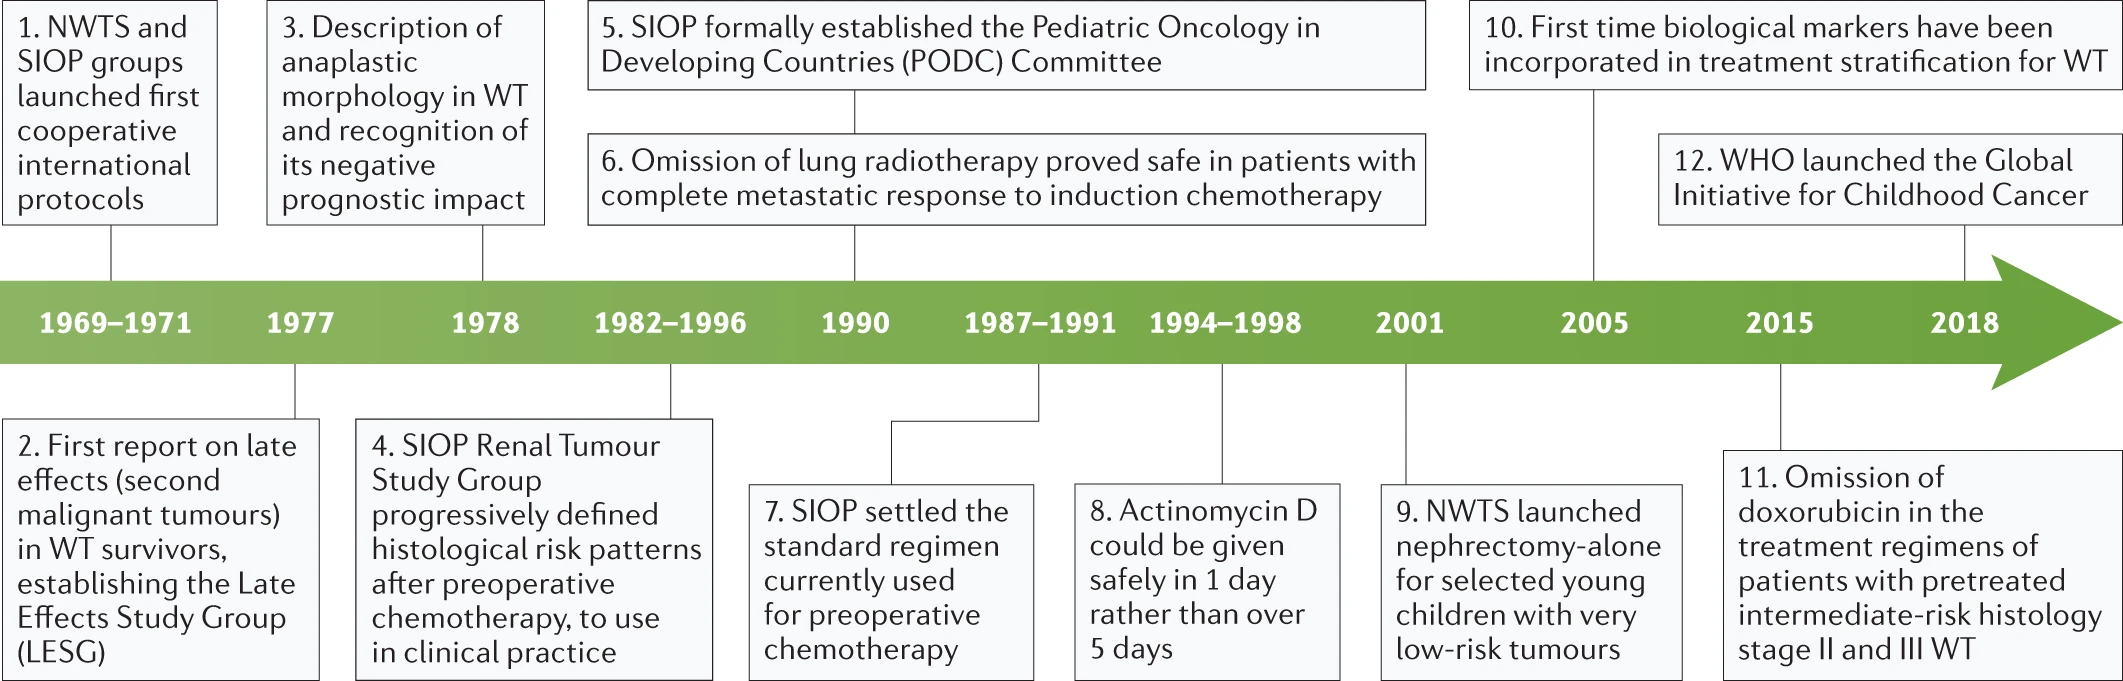 Timeline of key clinical advances that established the modern clinical management of children with Wilms tumour.